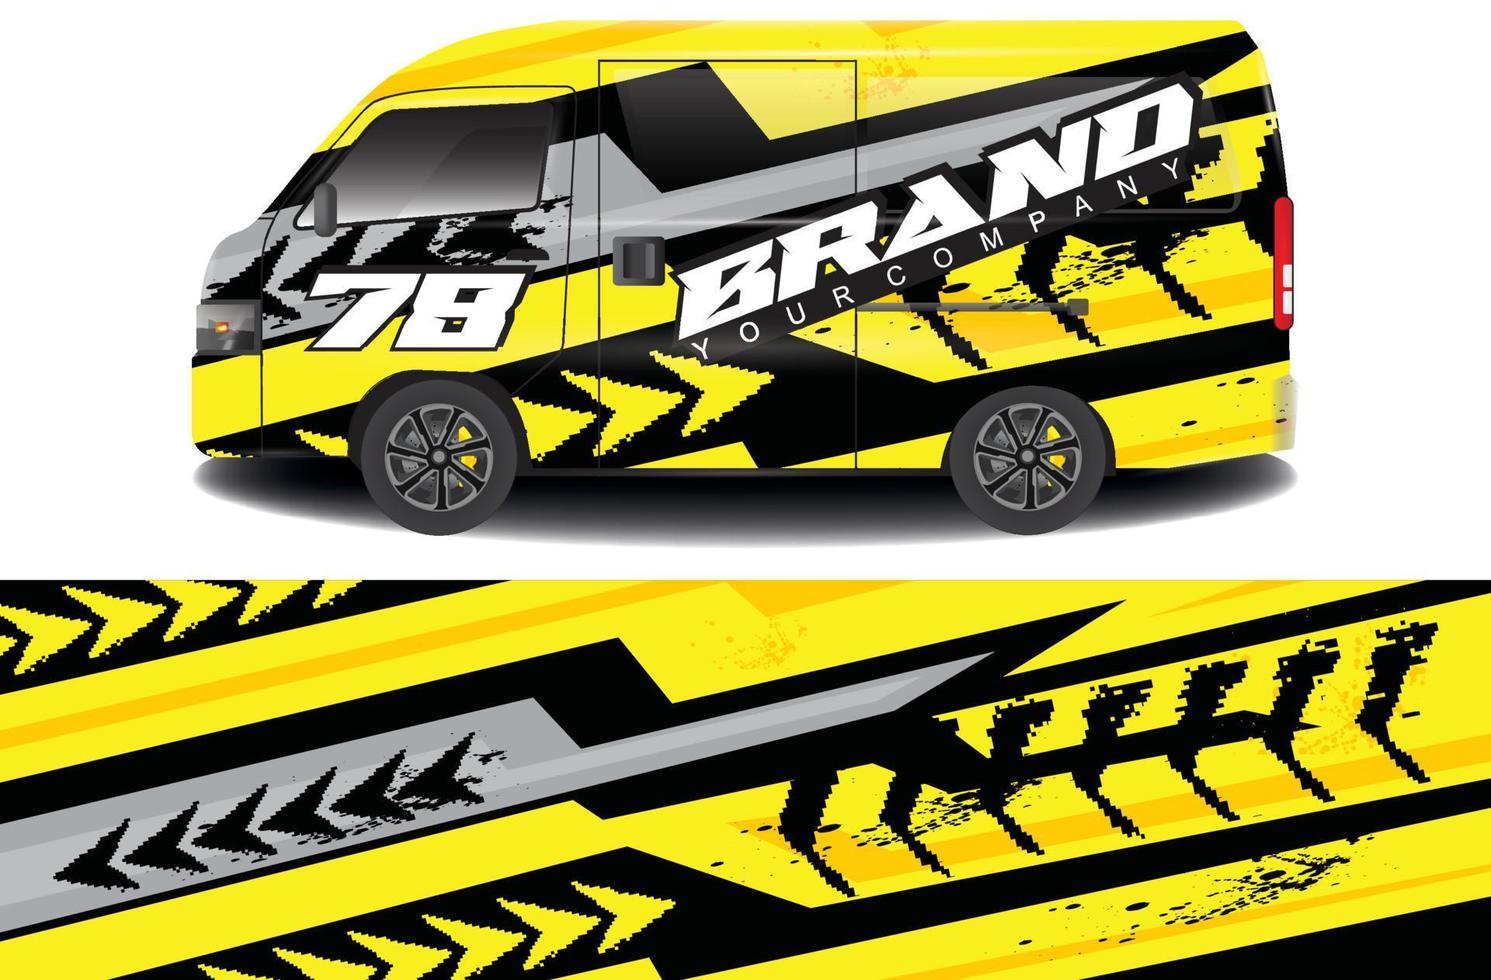 racing background sticker designs for camper car wraps and more vector